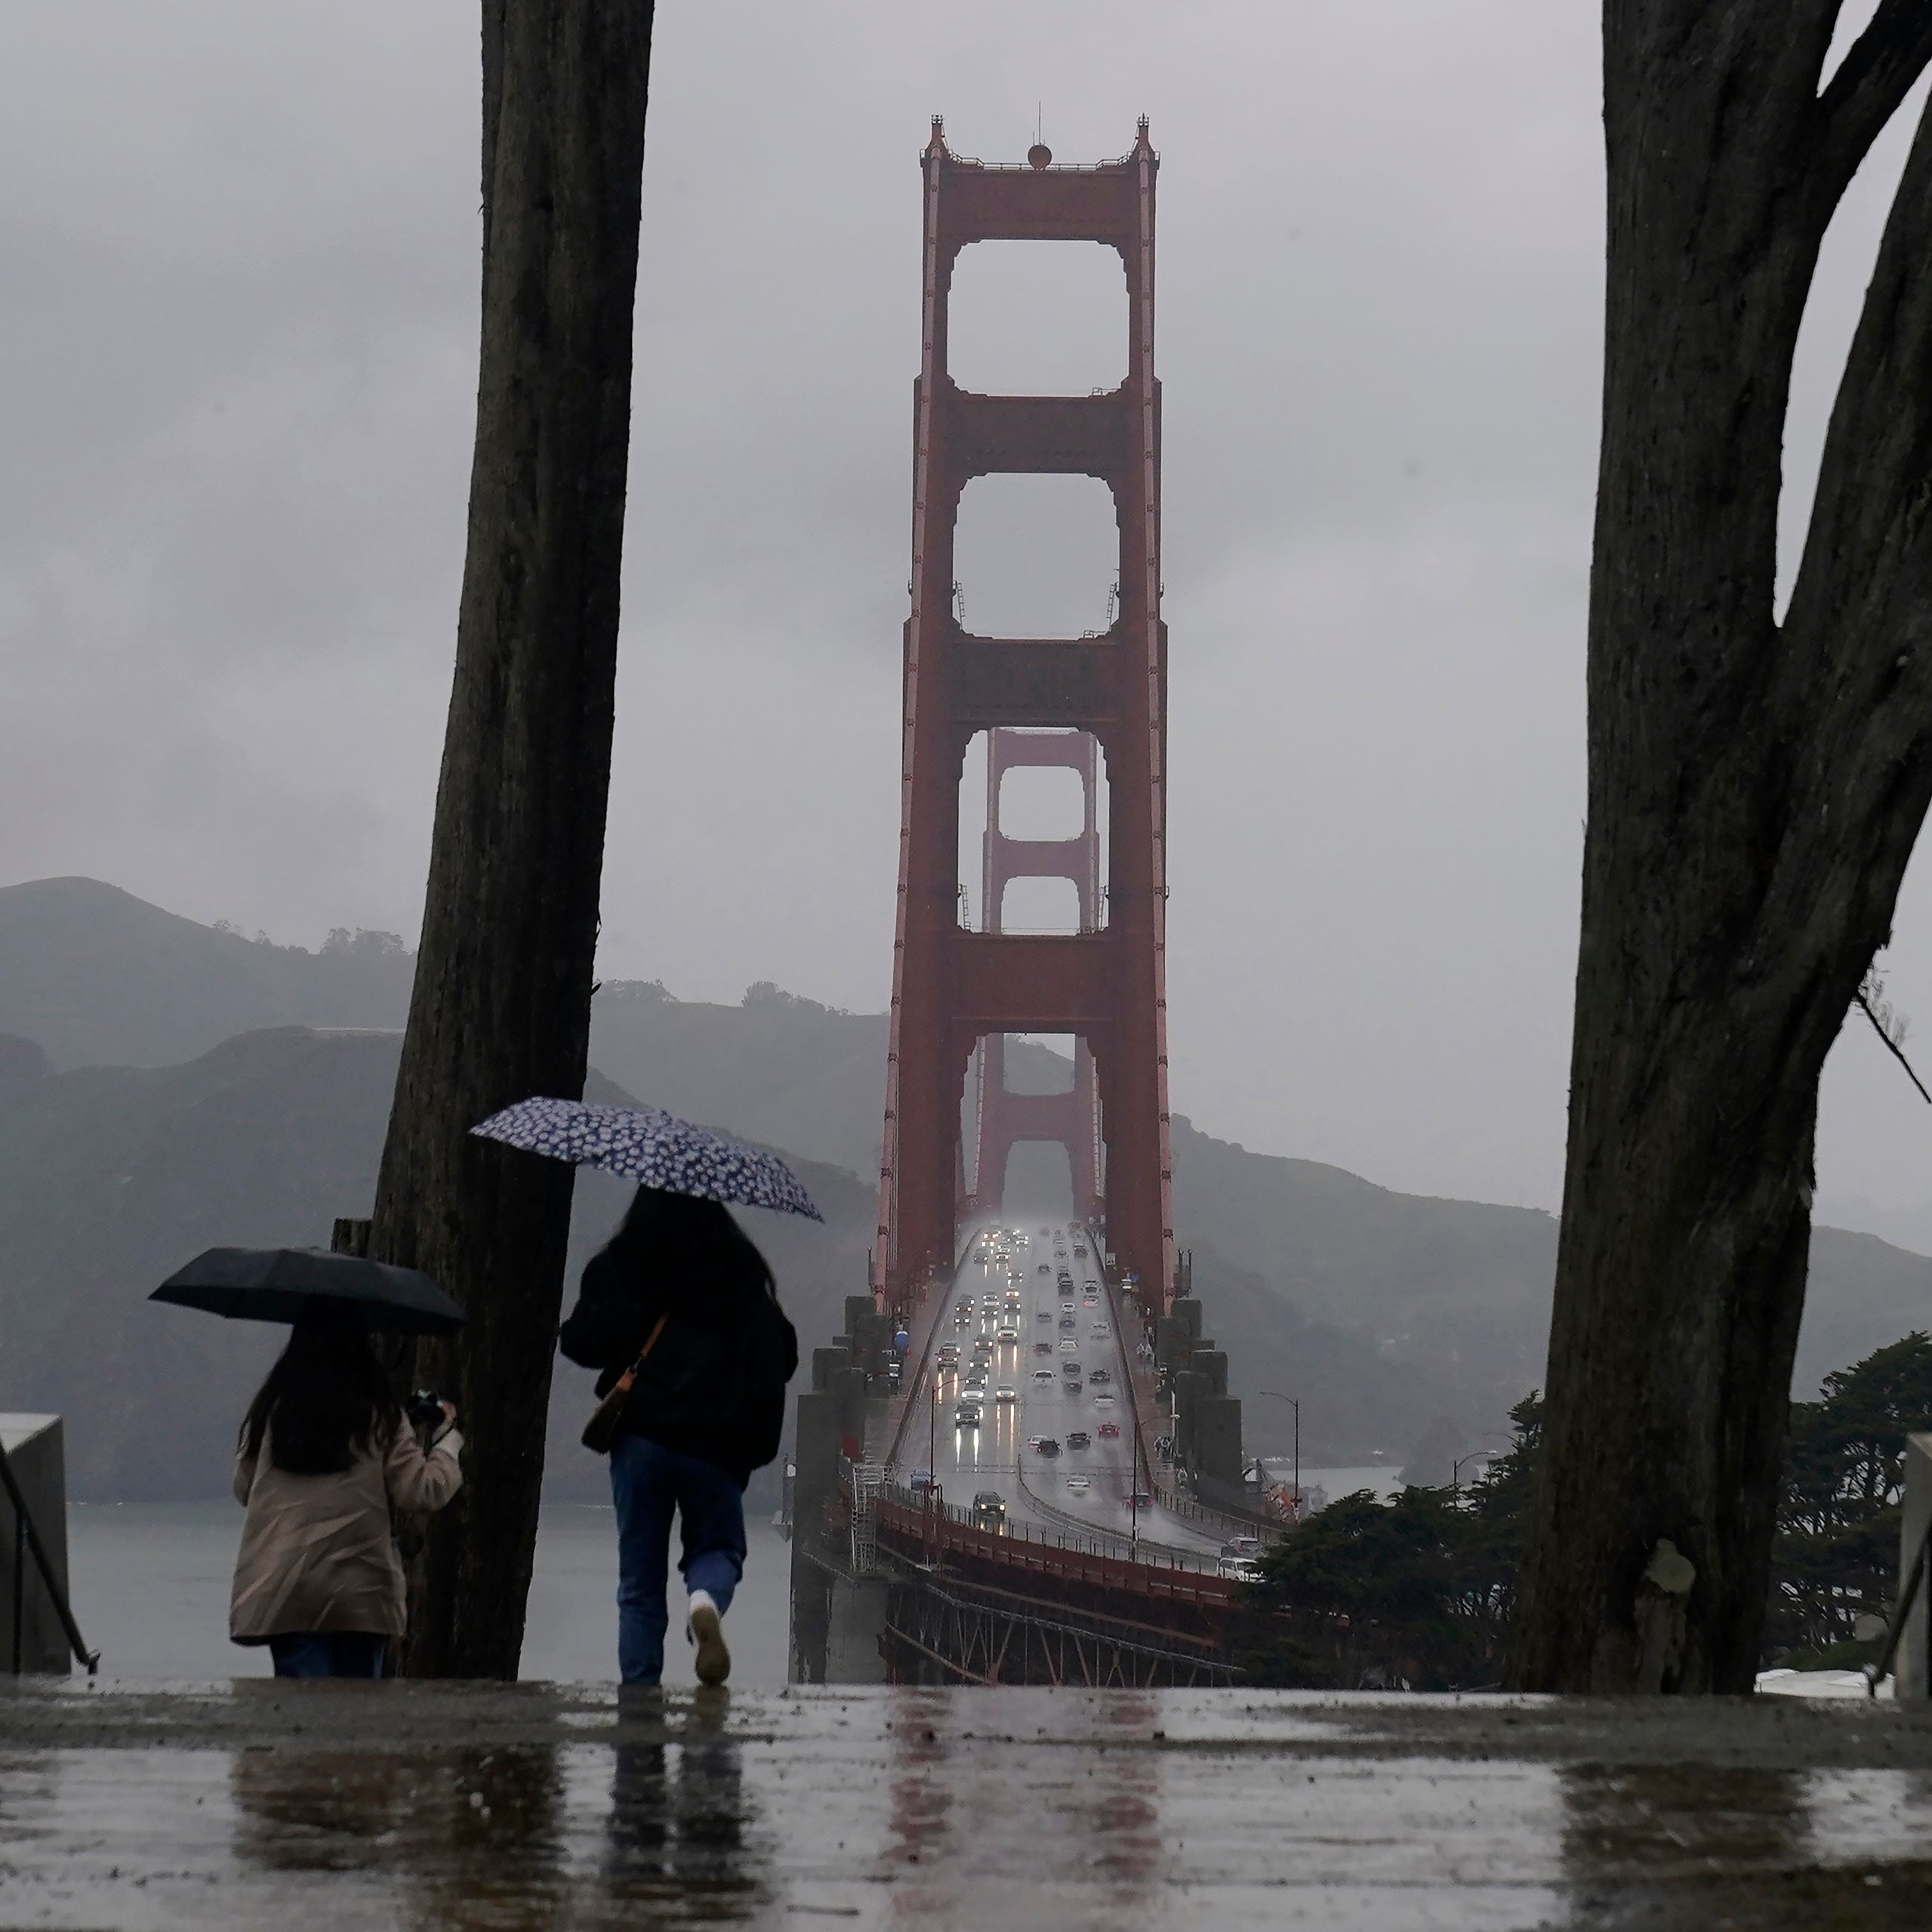 Traffic moves on the Golden Gate Bridge as people carry umbrellas while walking down a path at the Golden Gate Overlook in San Francisco, March 9, 2023. California is bracing for the arrival of an atmospheric river that forecasters warn will bring heavy rain, strong winds, thunderstorms and the threat of flooding even as the state is still digging out from earlier storms.